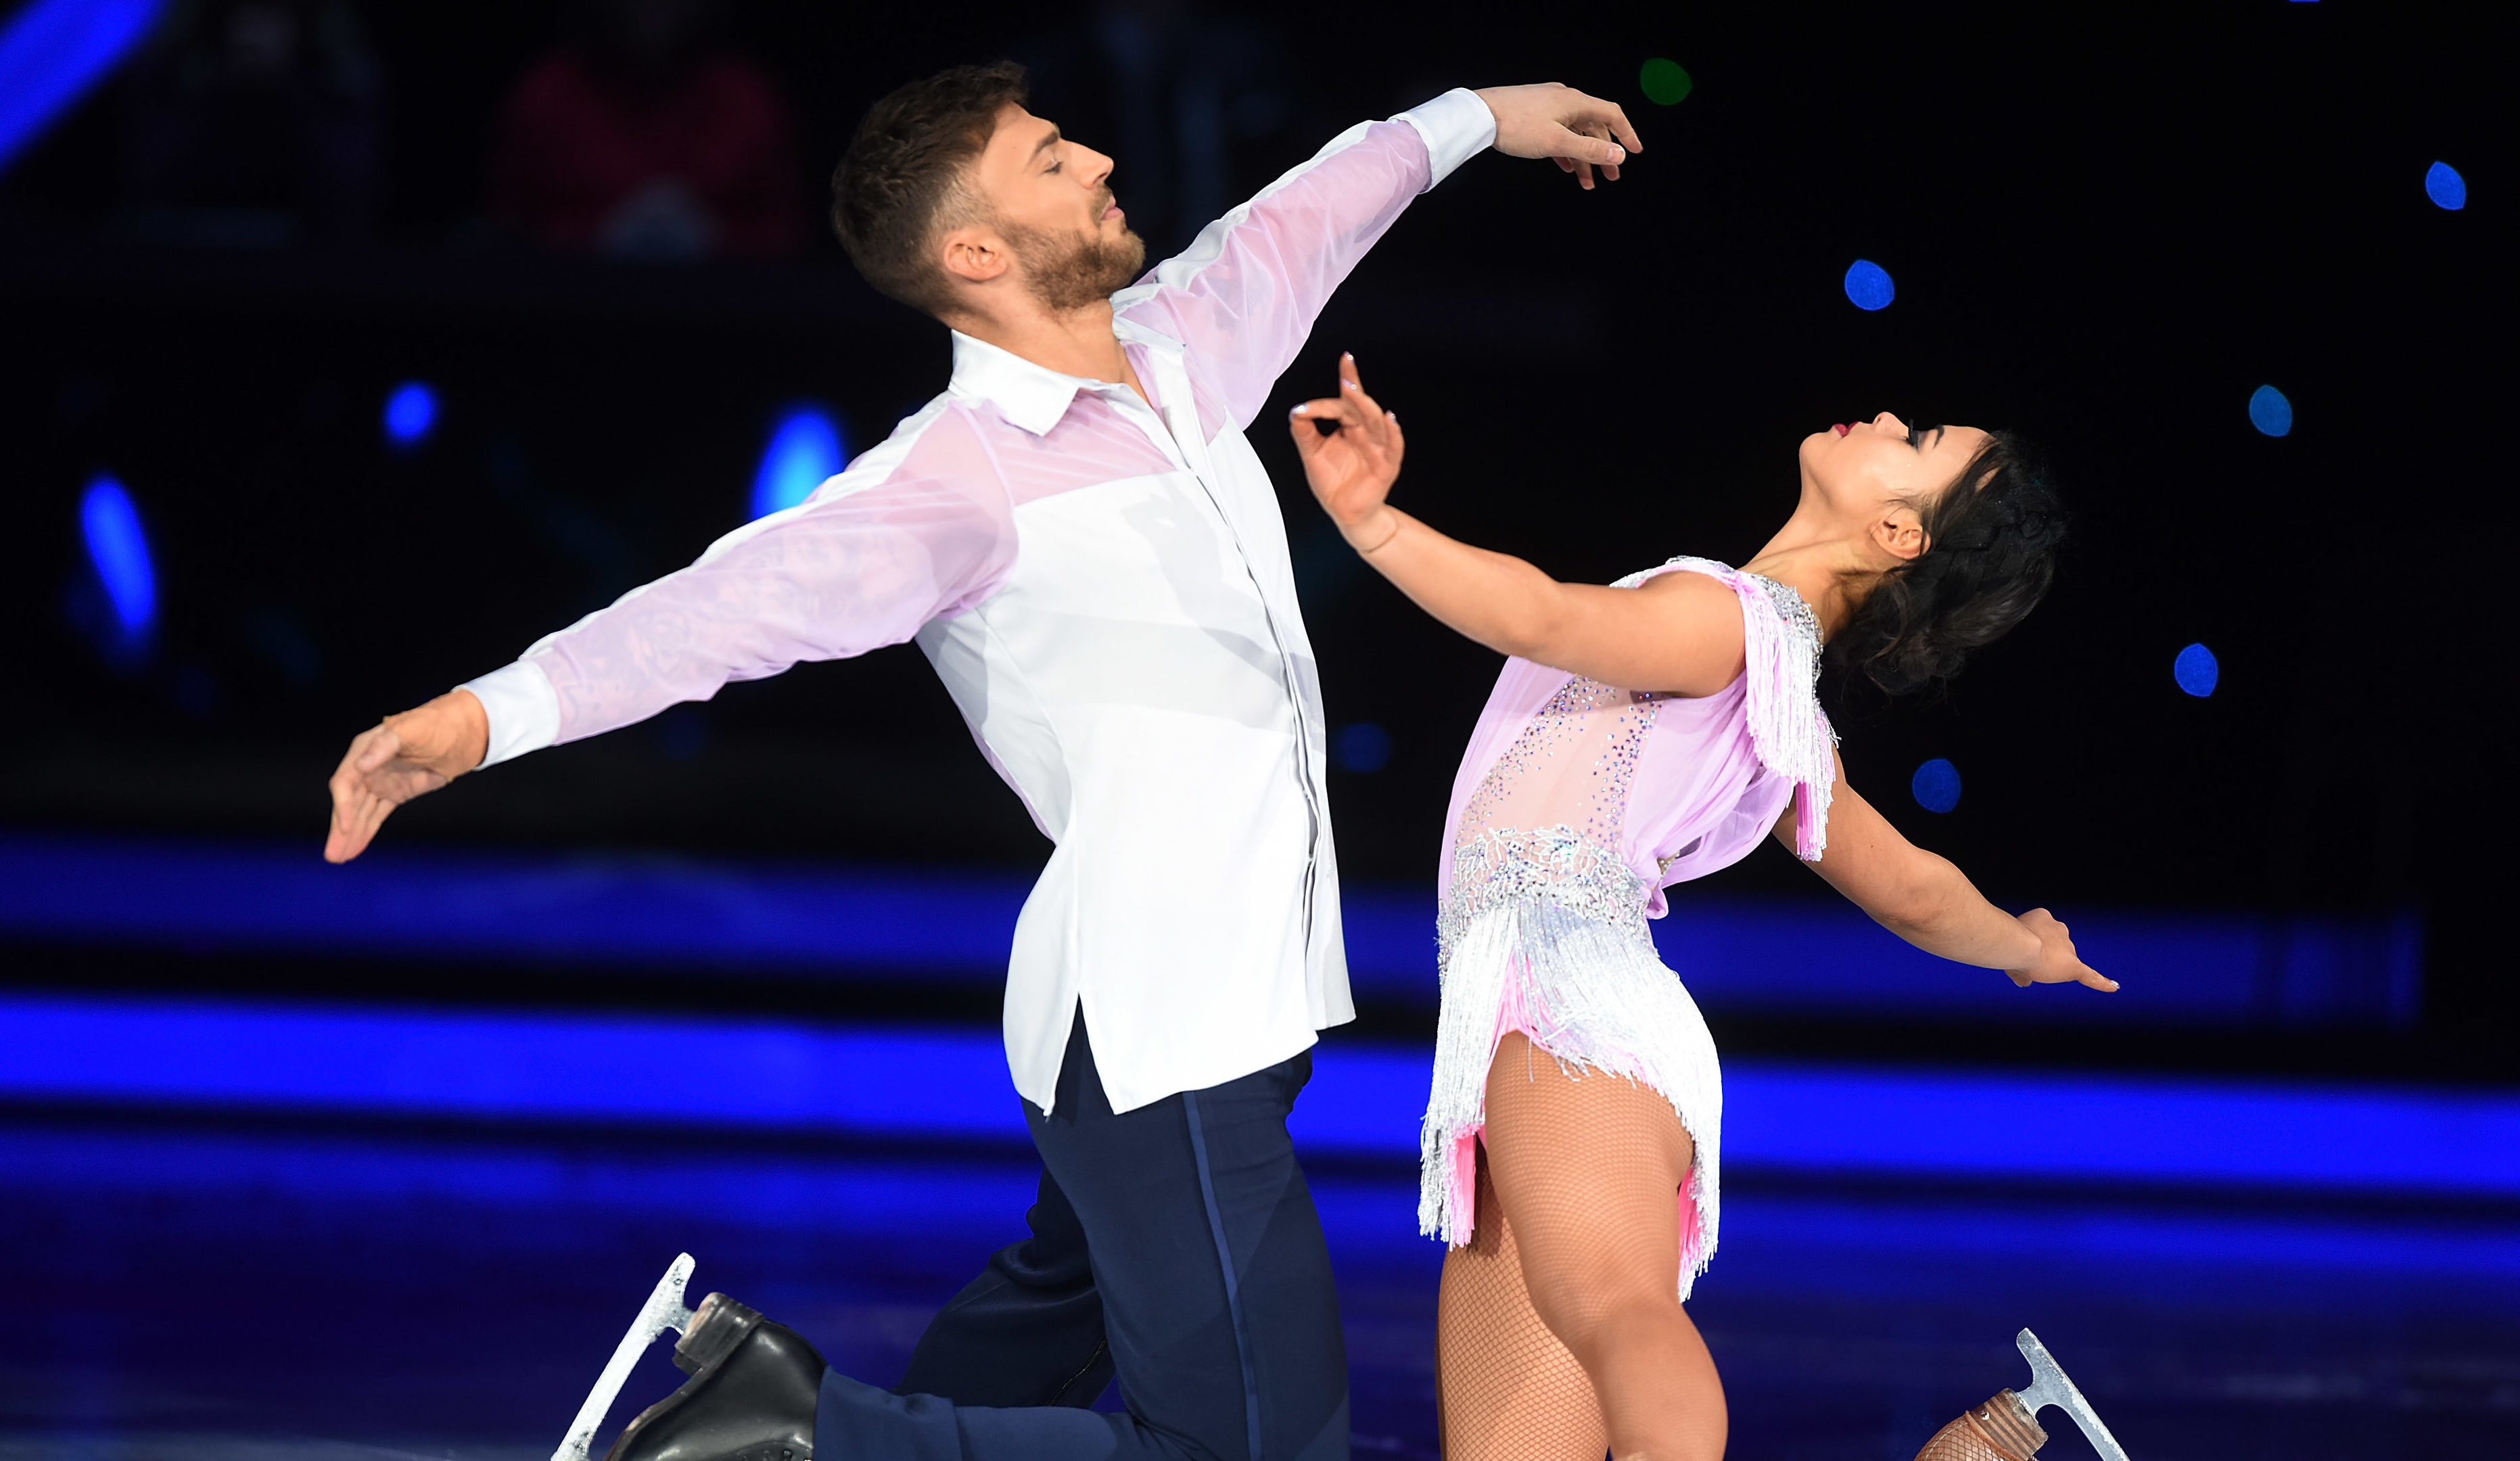 Jake and Vanessa Bauer starring in the Dancing on Ice Live Tour (Dave J Hogan/Getty Images)